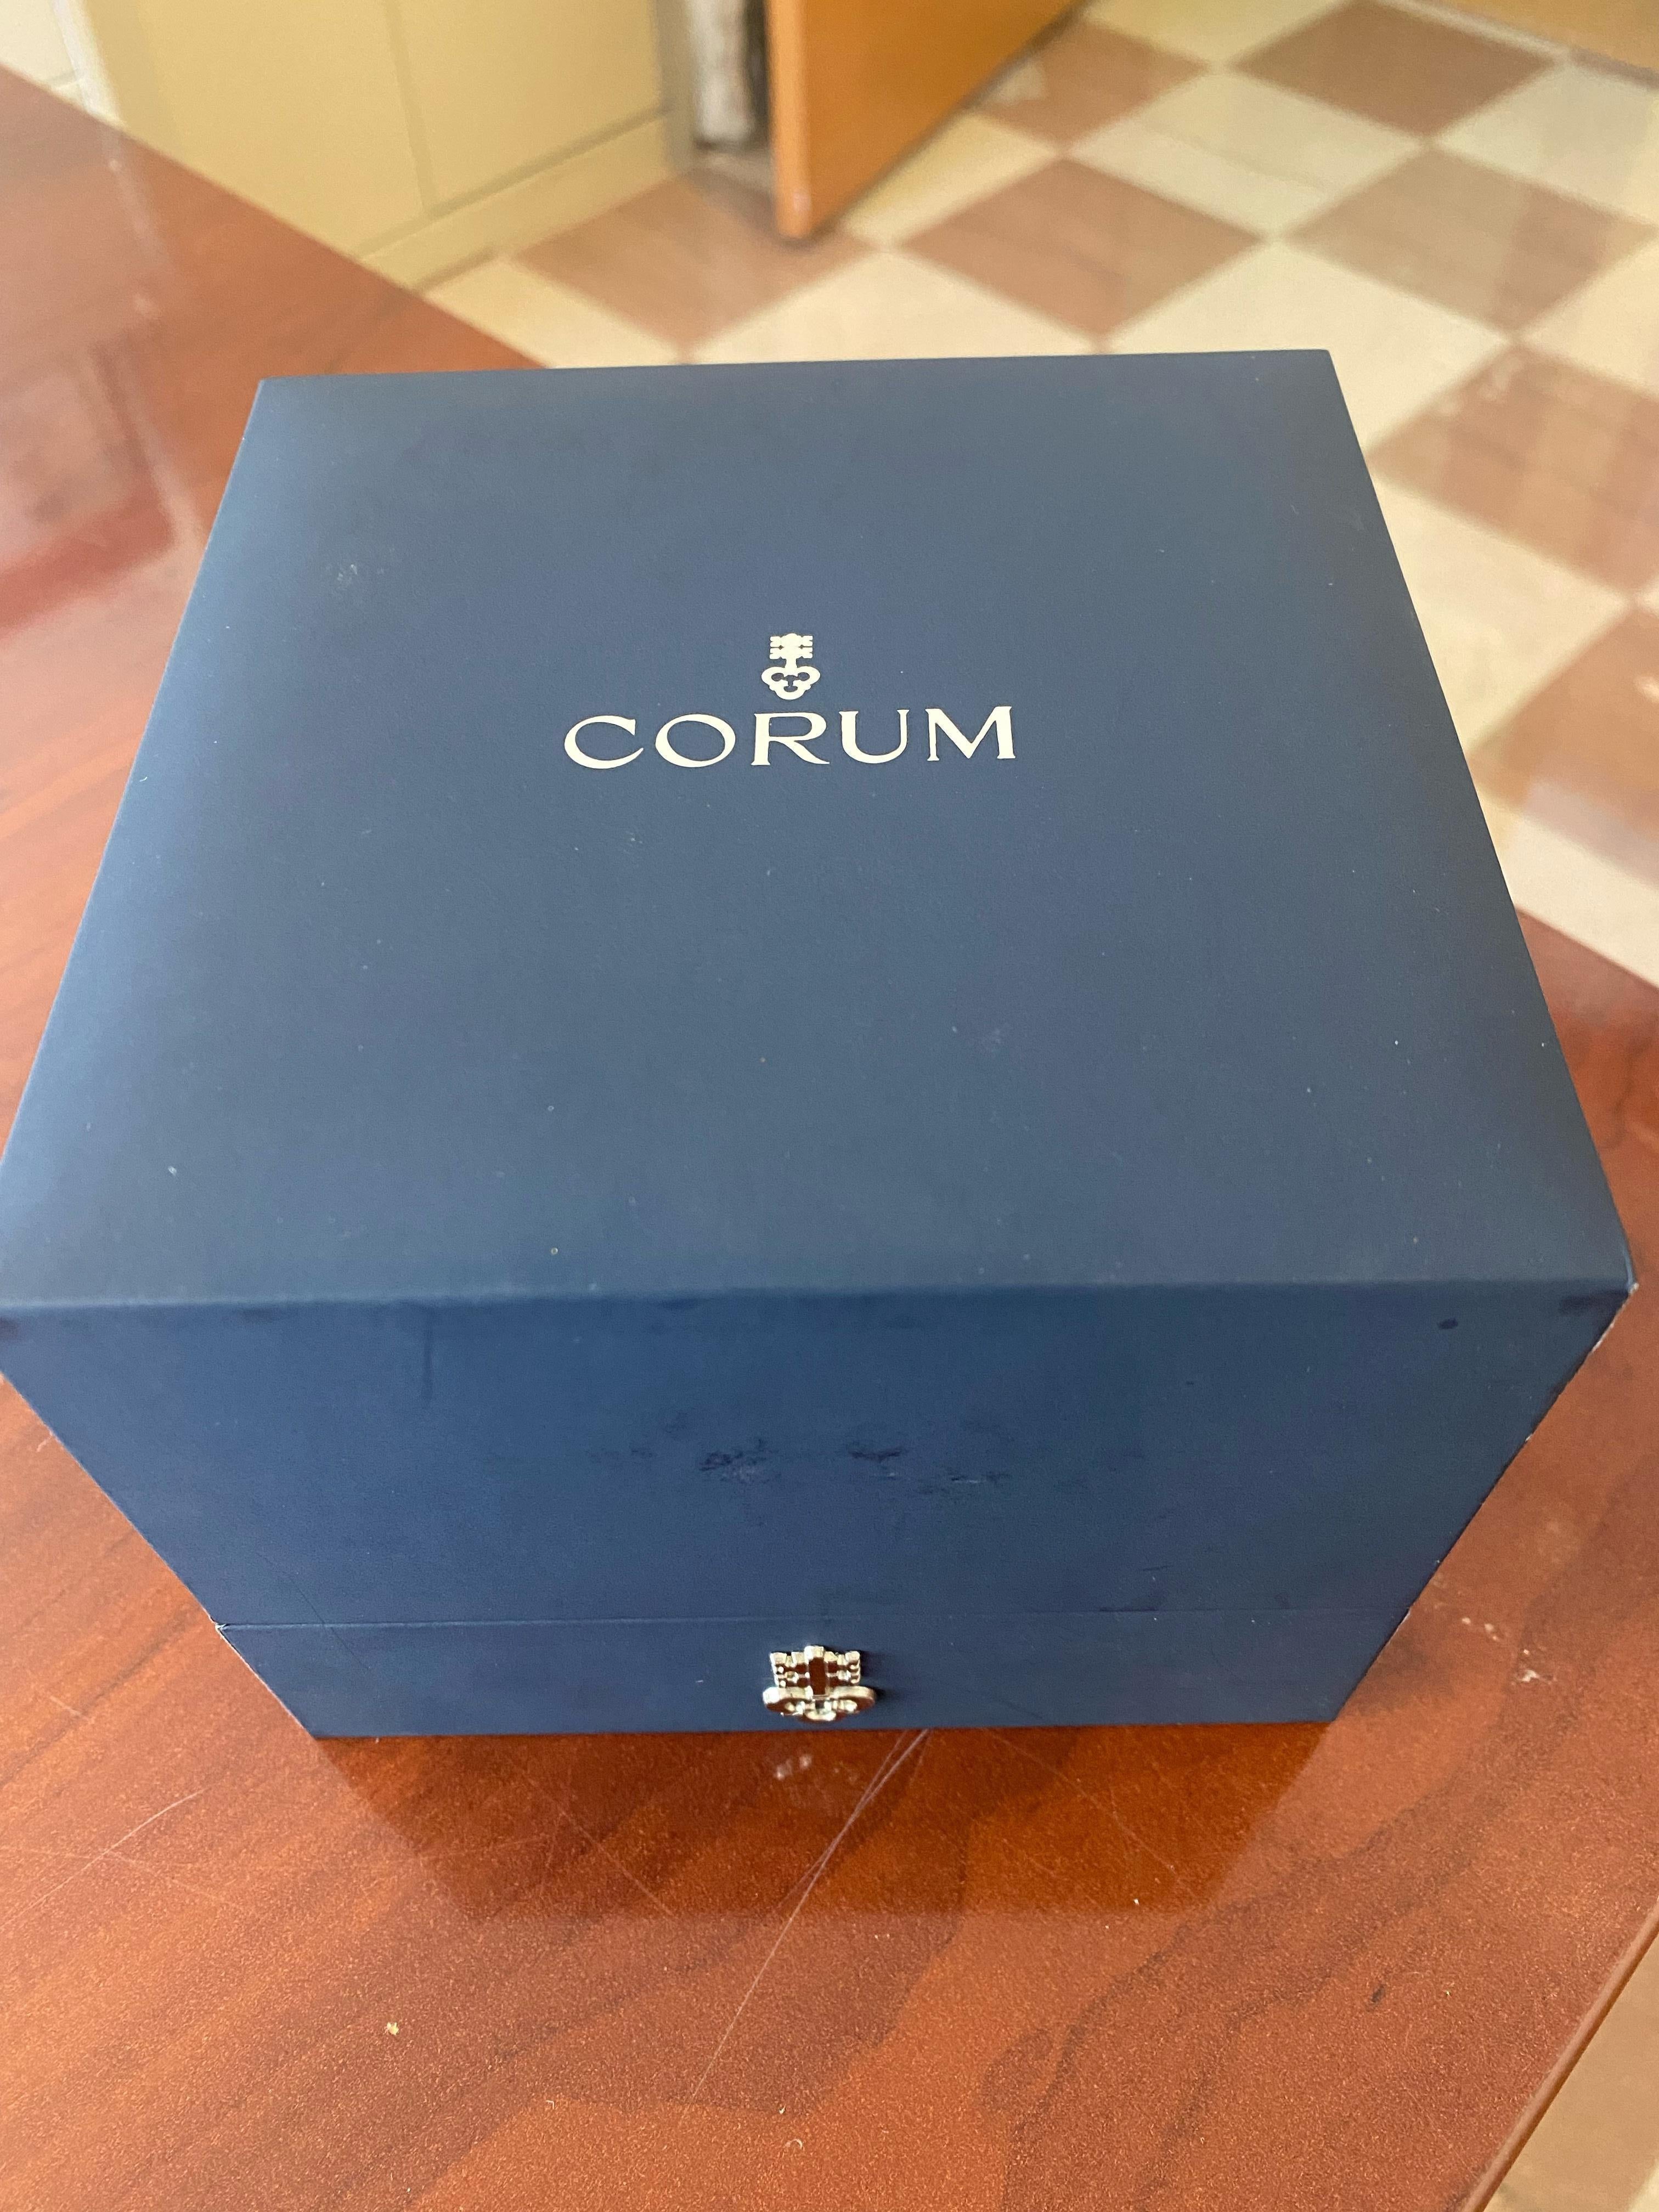 Corum Admiral's Cup Competition Automatic Black Dial Watch 94793104.0371 In Excellent Condition For Sale In Miami, FL